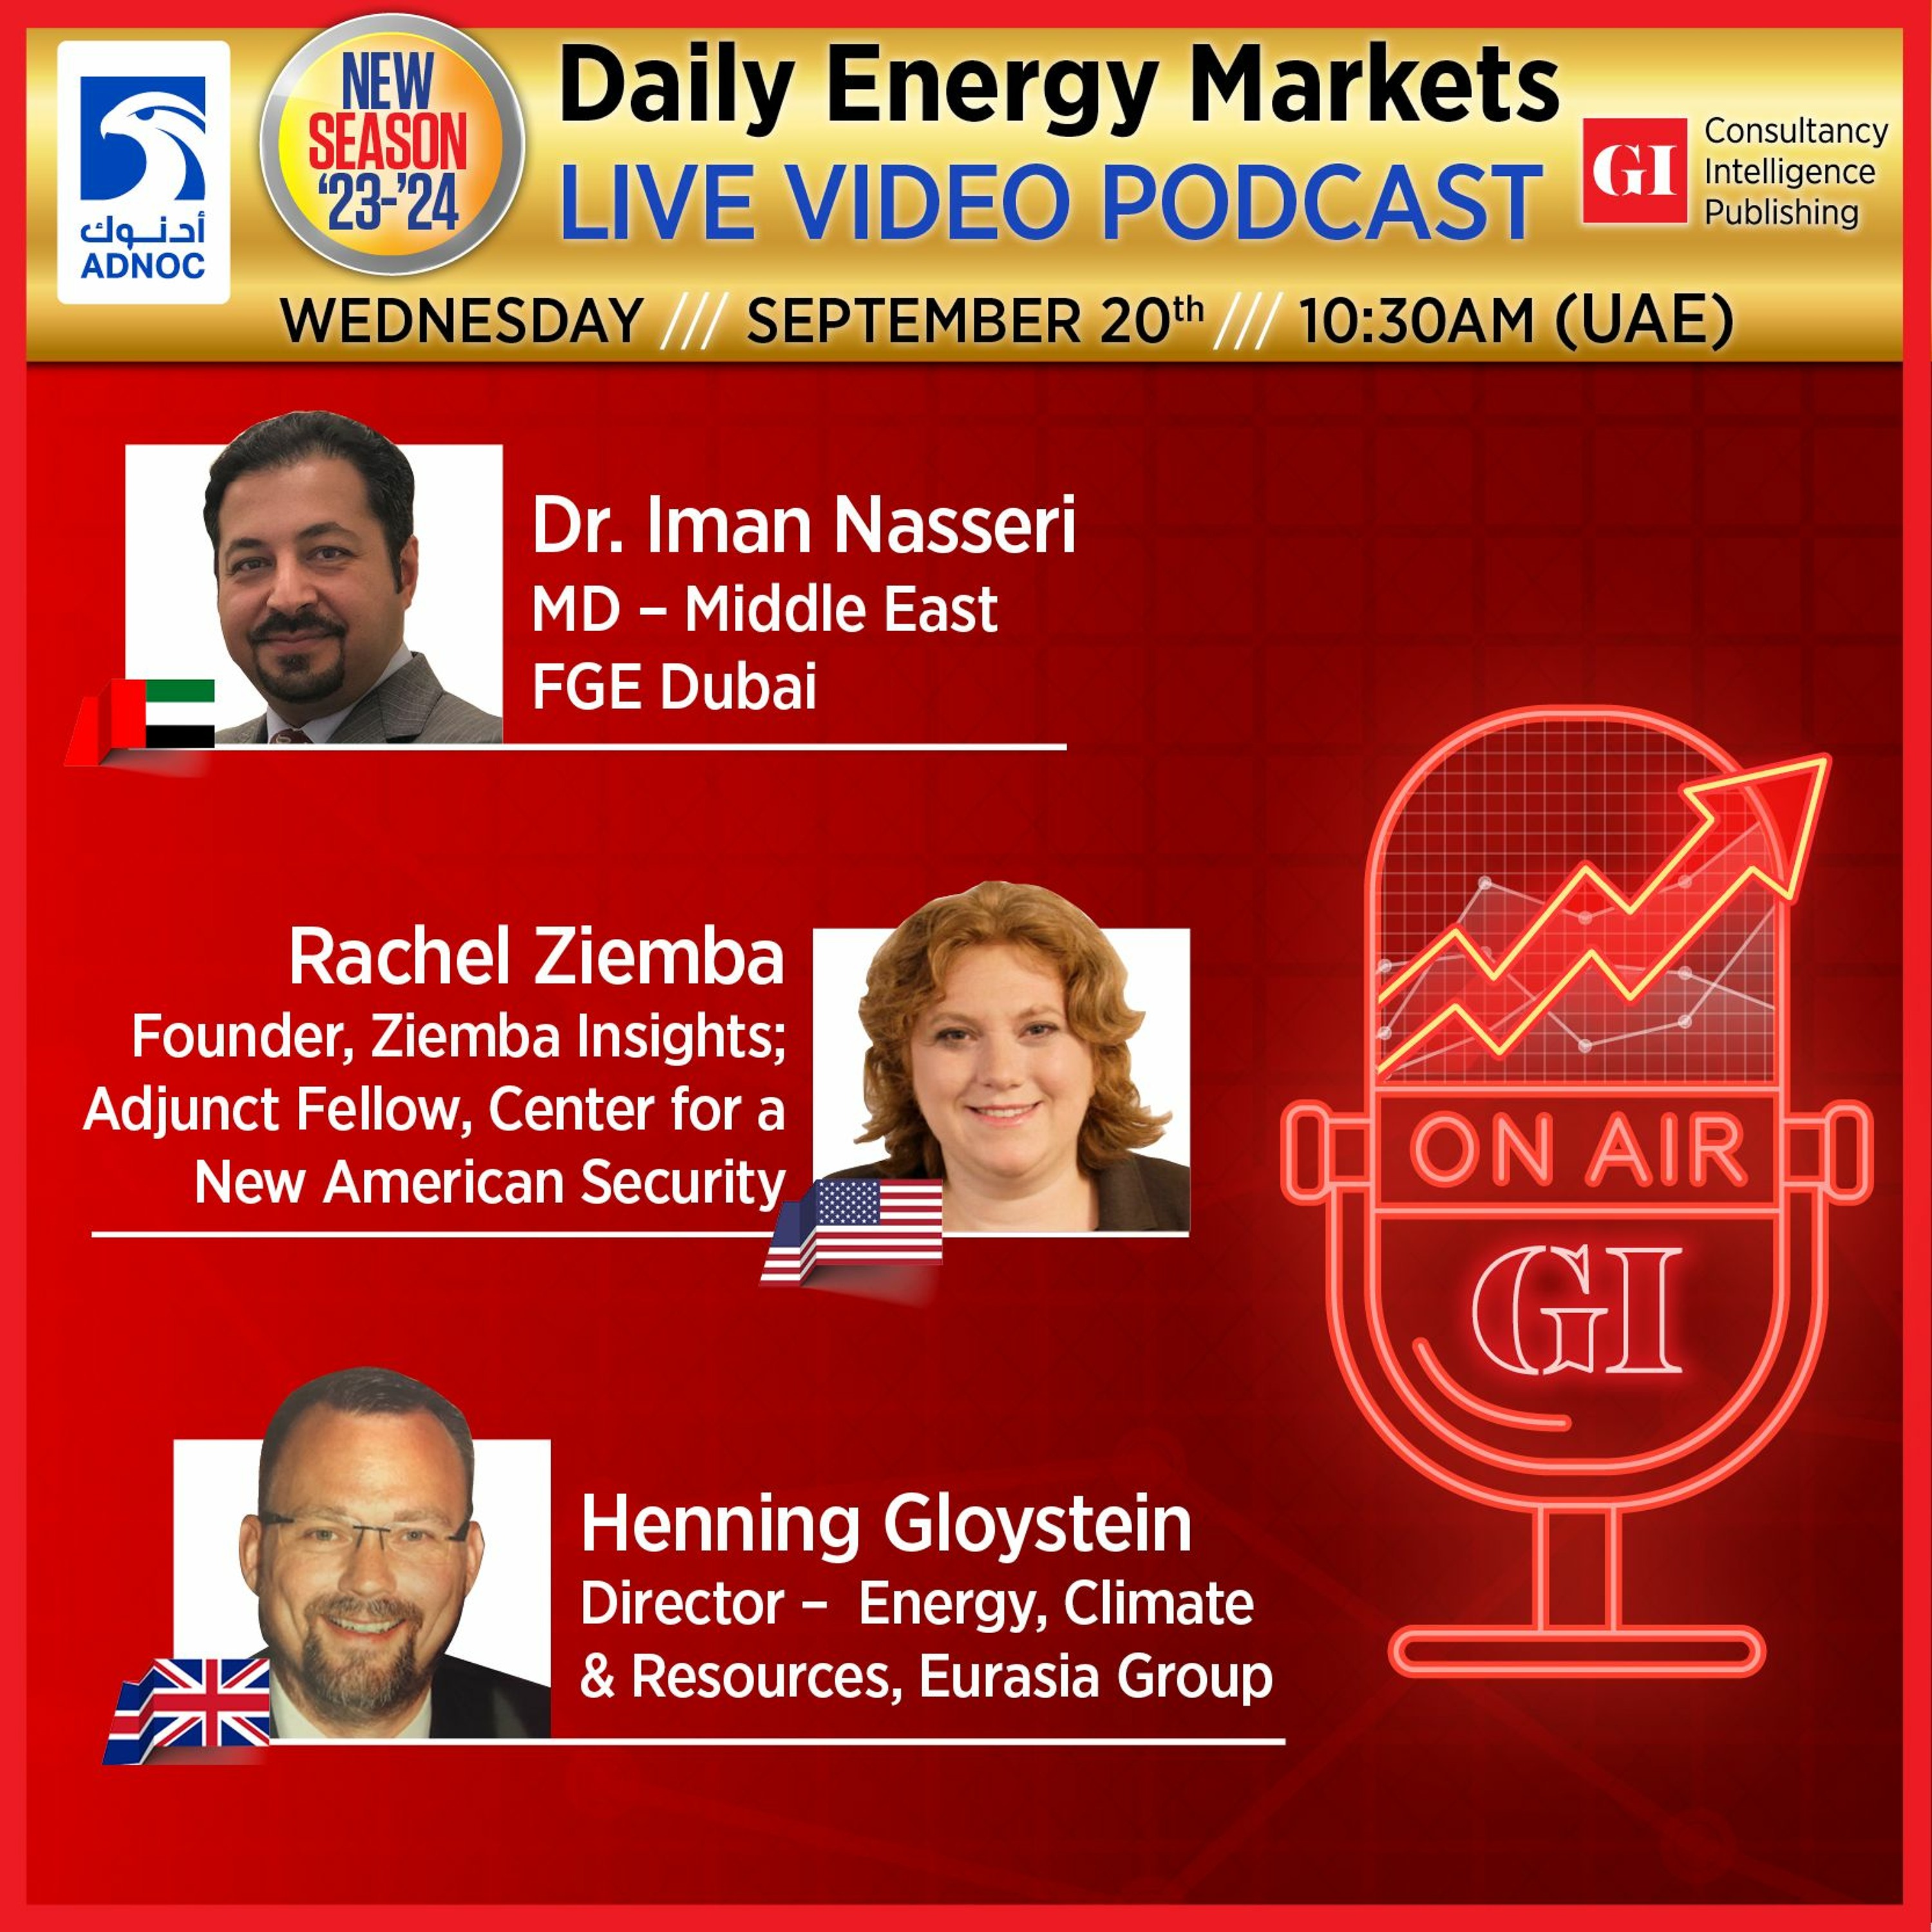 PODCAST: Daily Energy Markets - September 20th